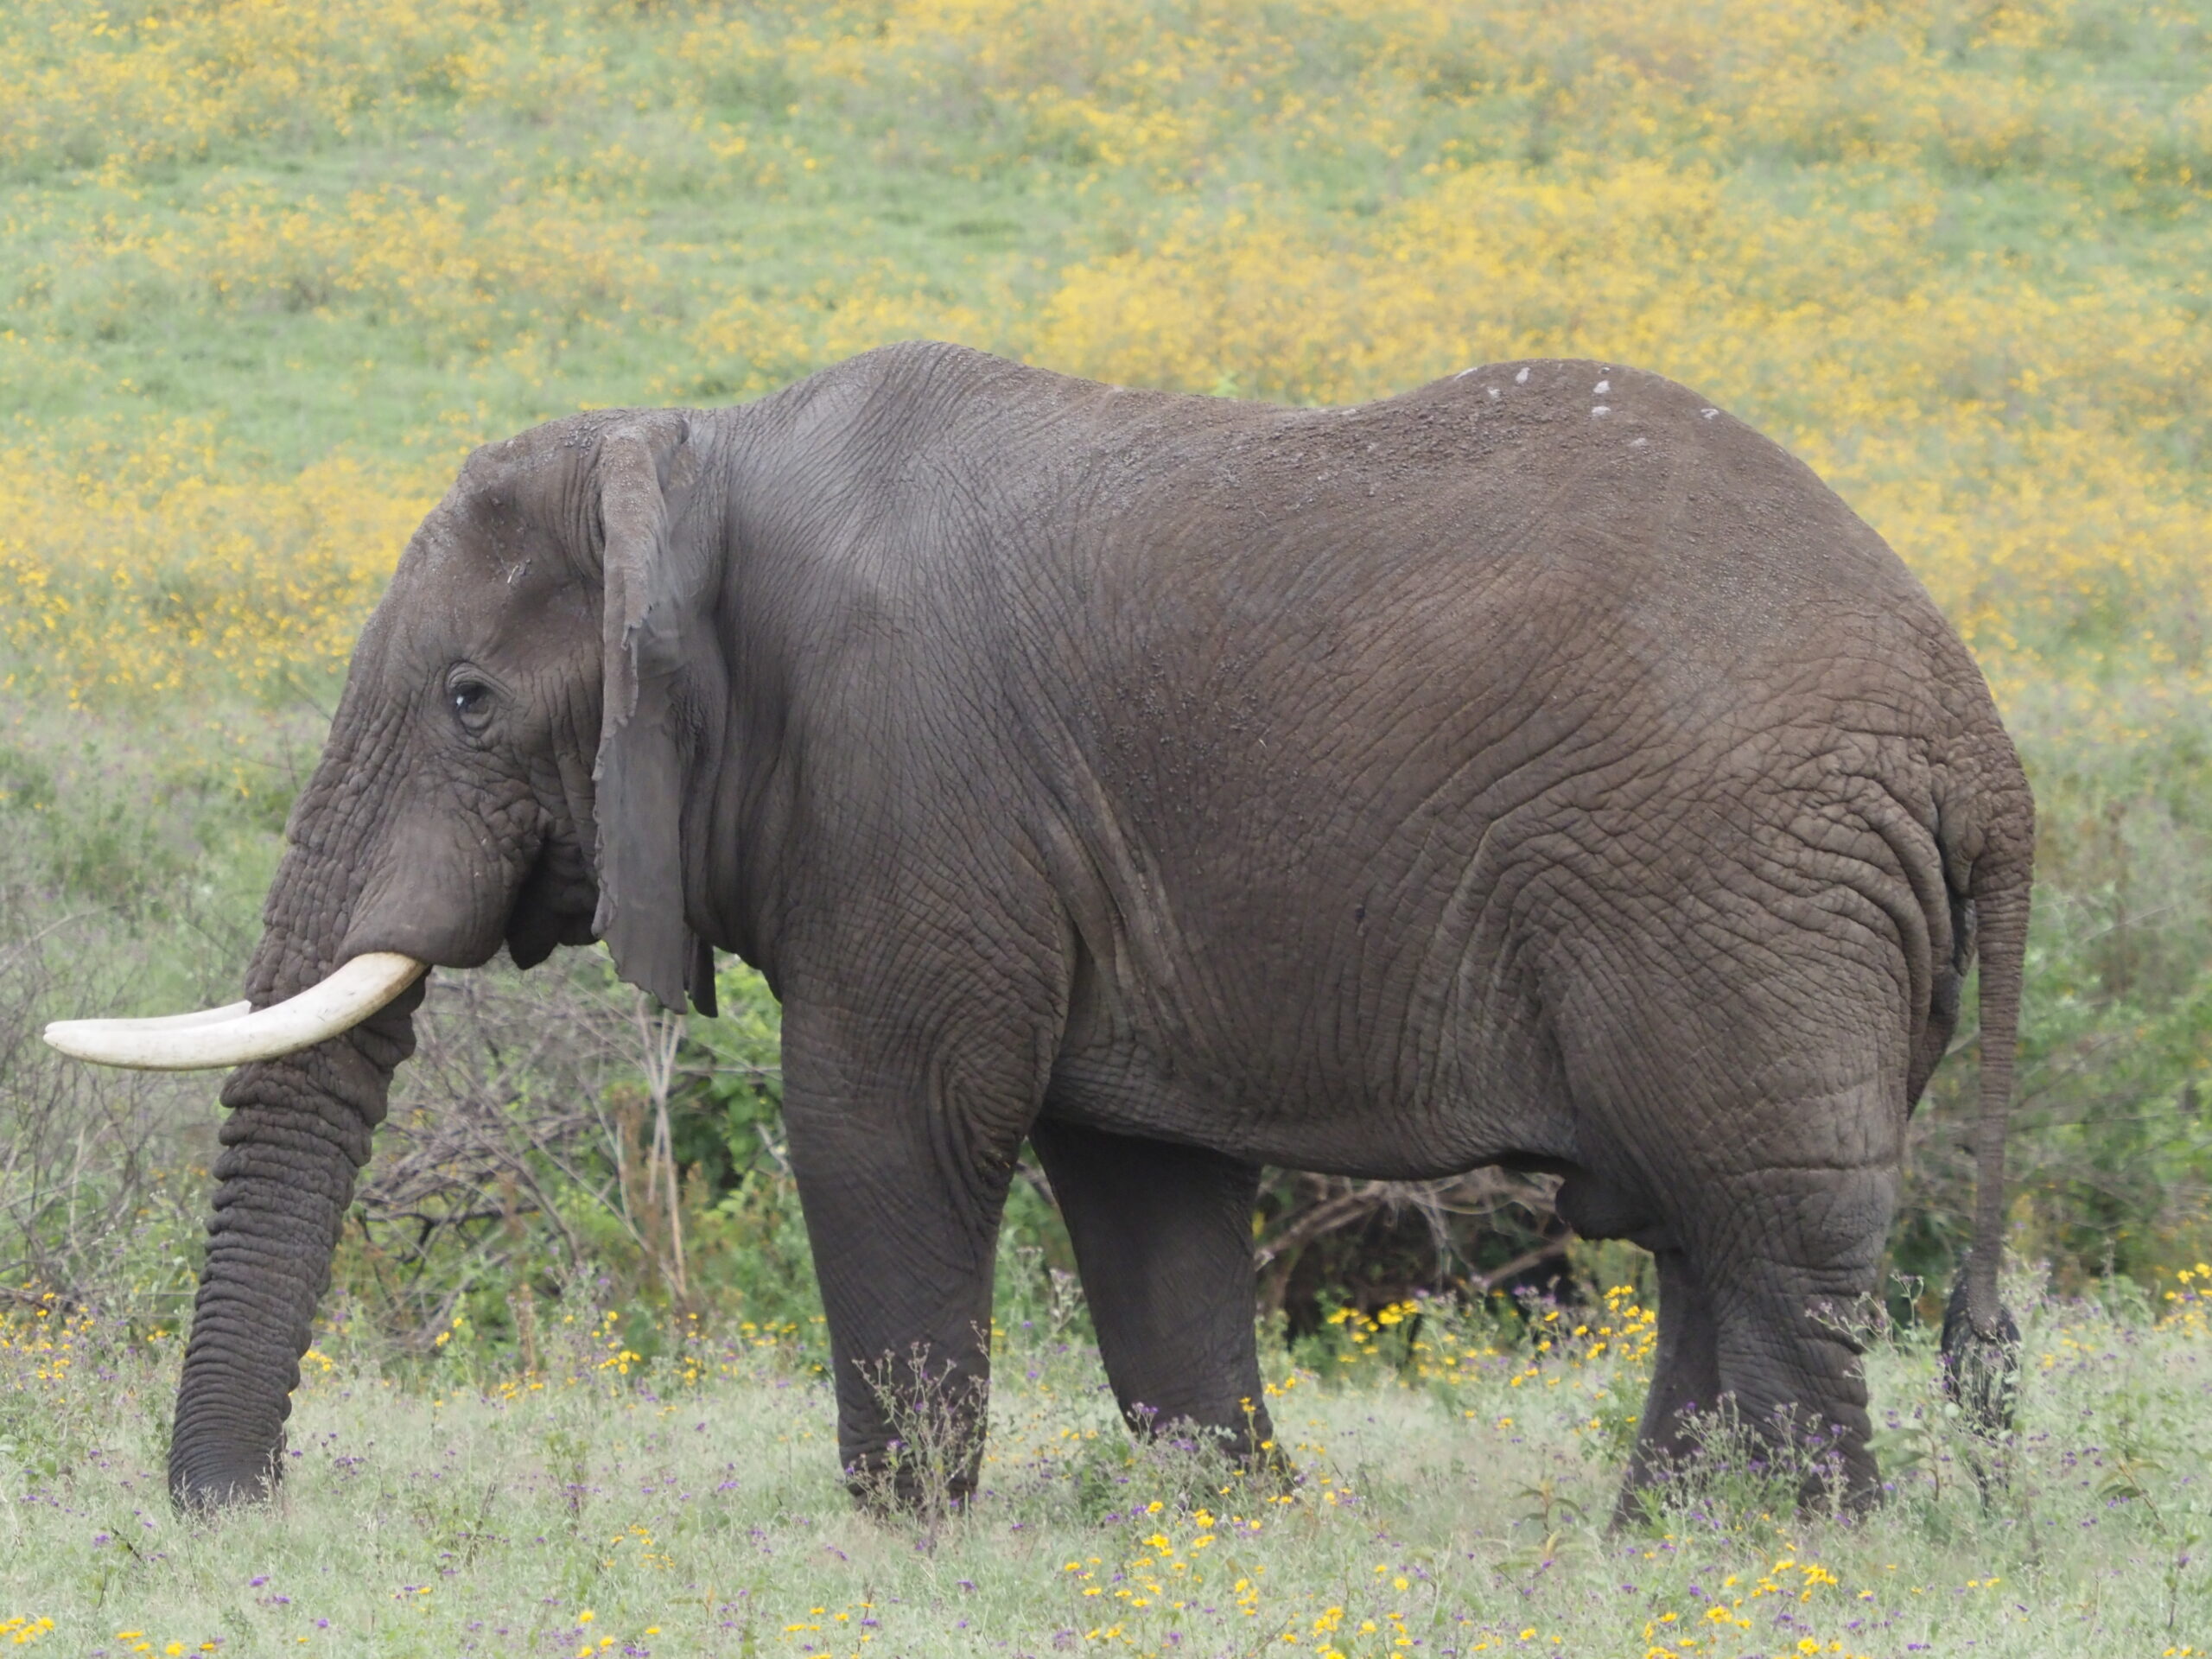 Elephant In 7 Day The Great Wildebeest Migration Safari